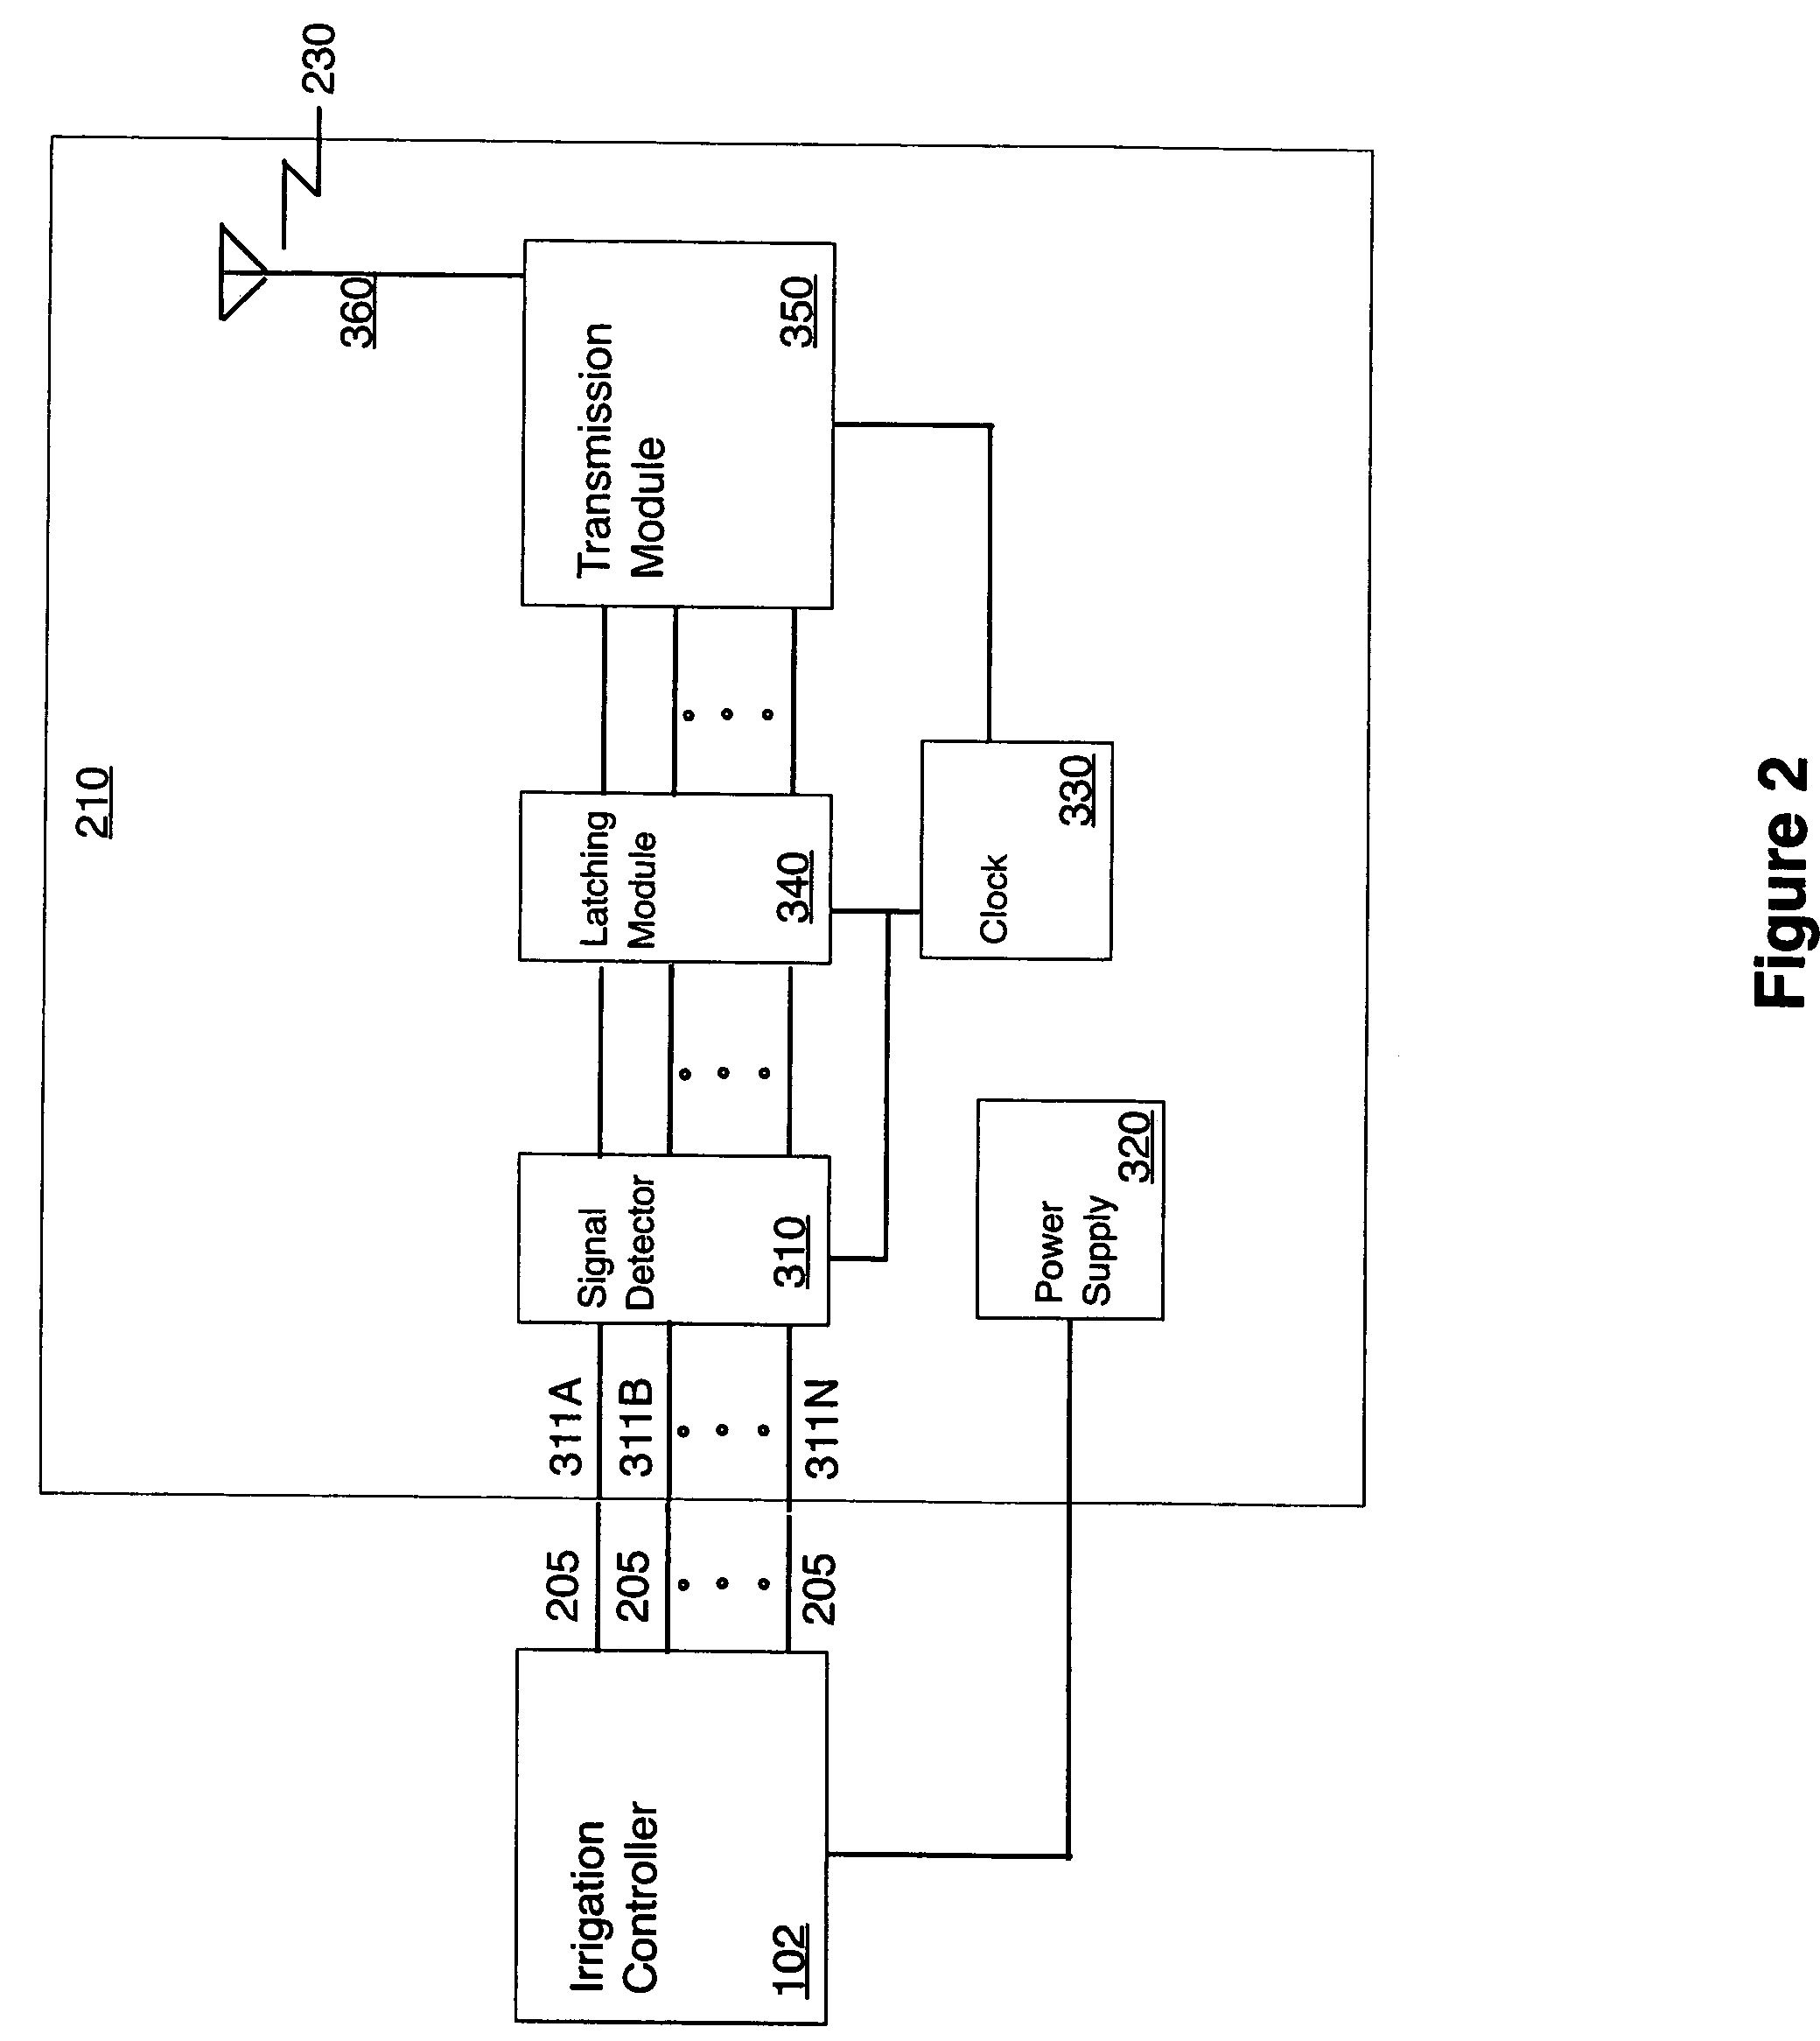 Systems and methods for adaptation to wireless remote control of irrigation valves from existing hardwired control devices